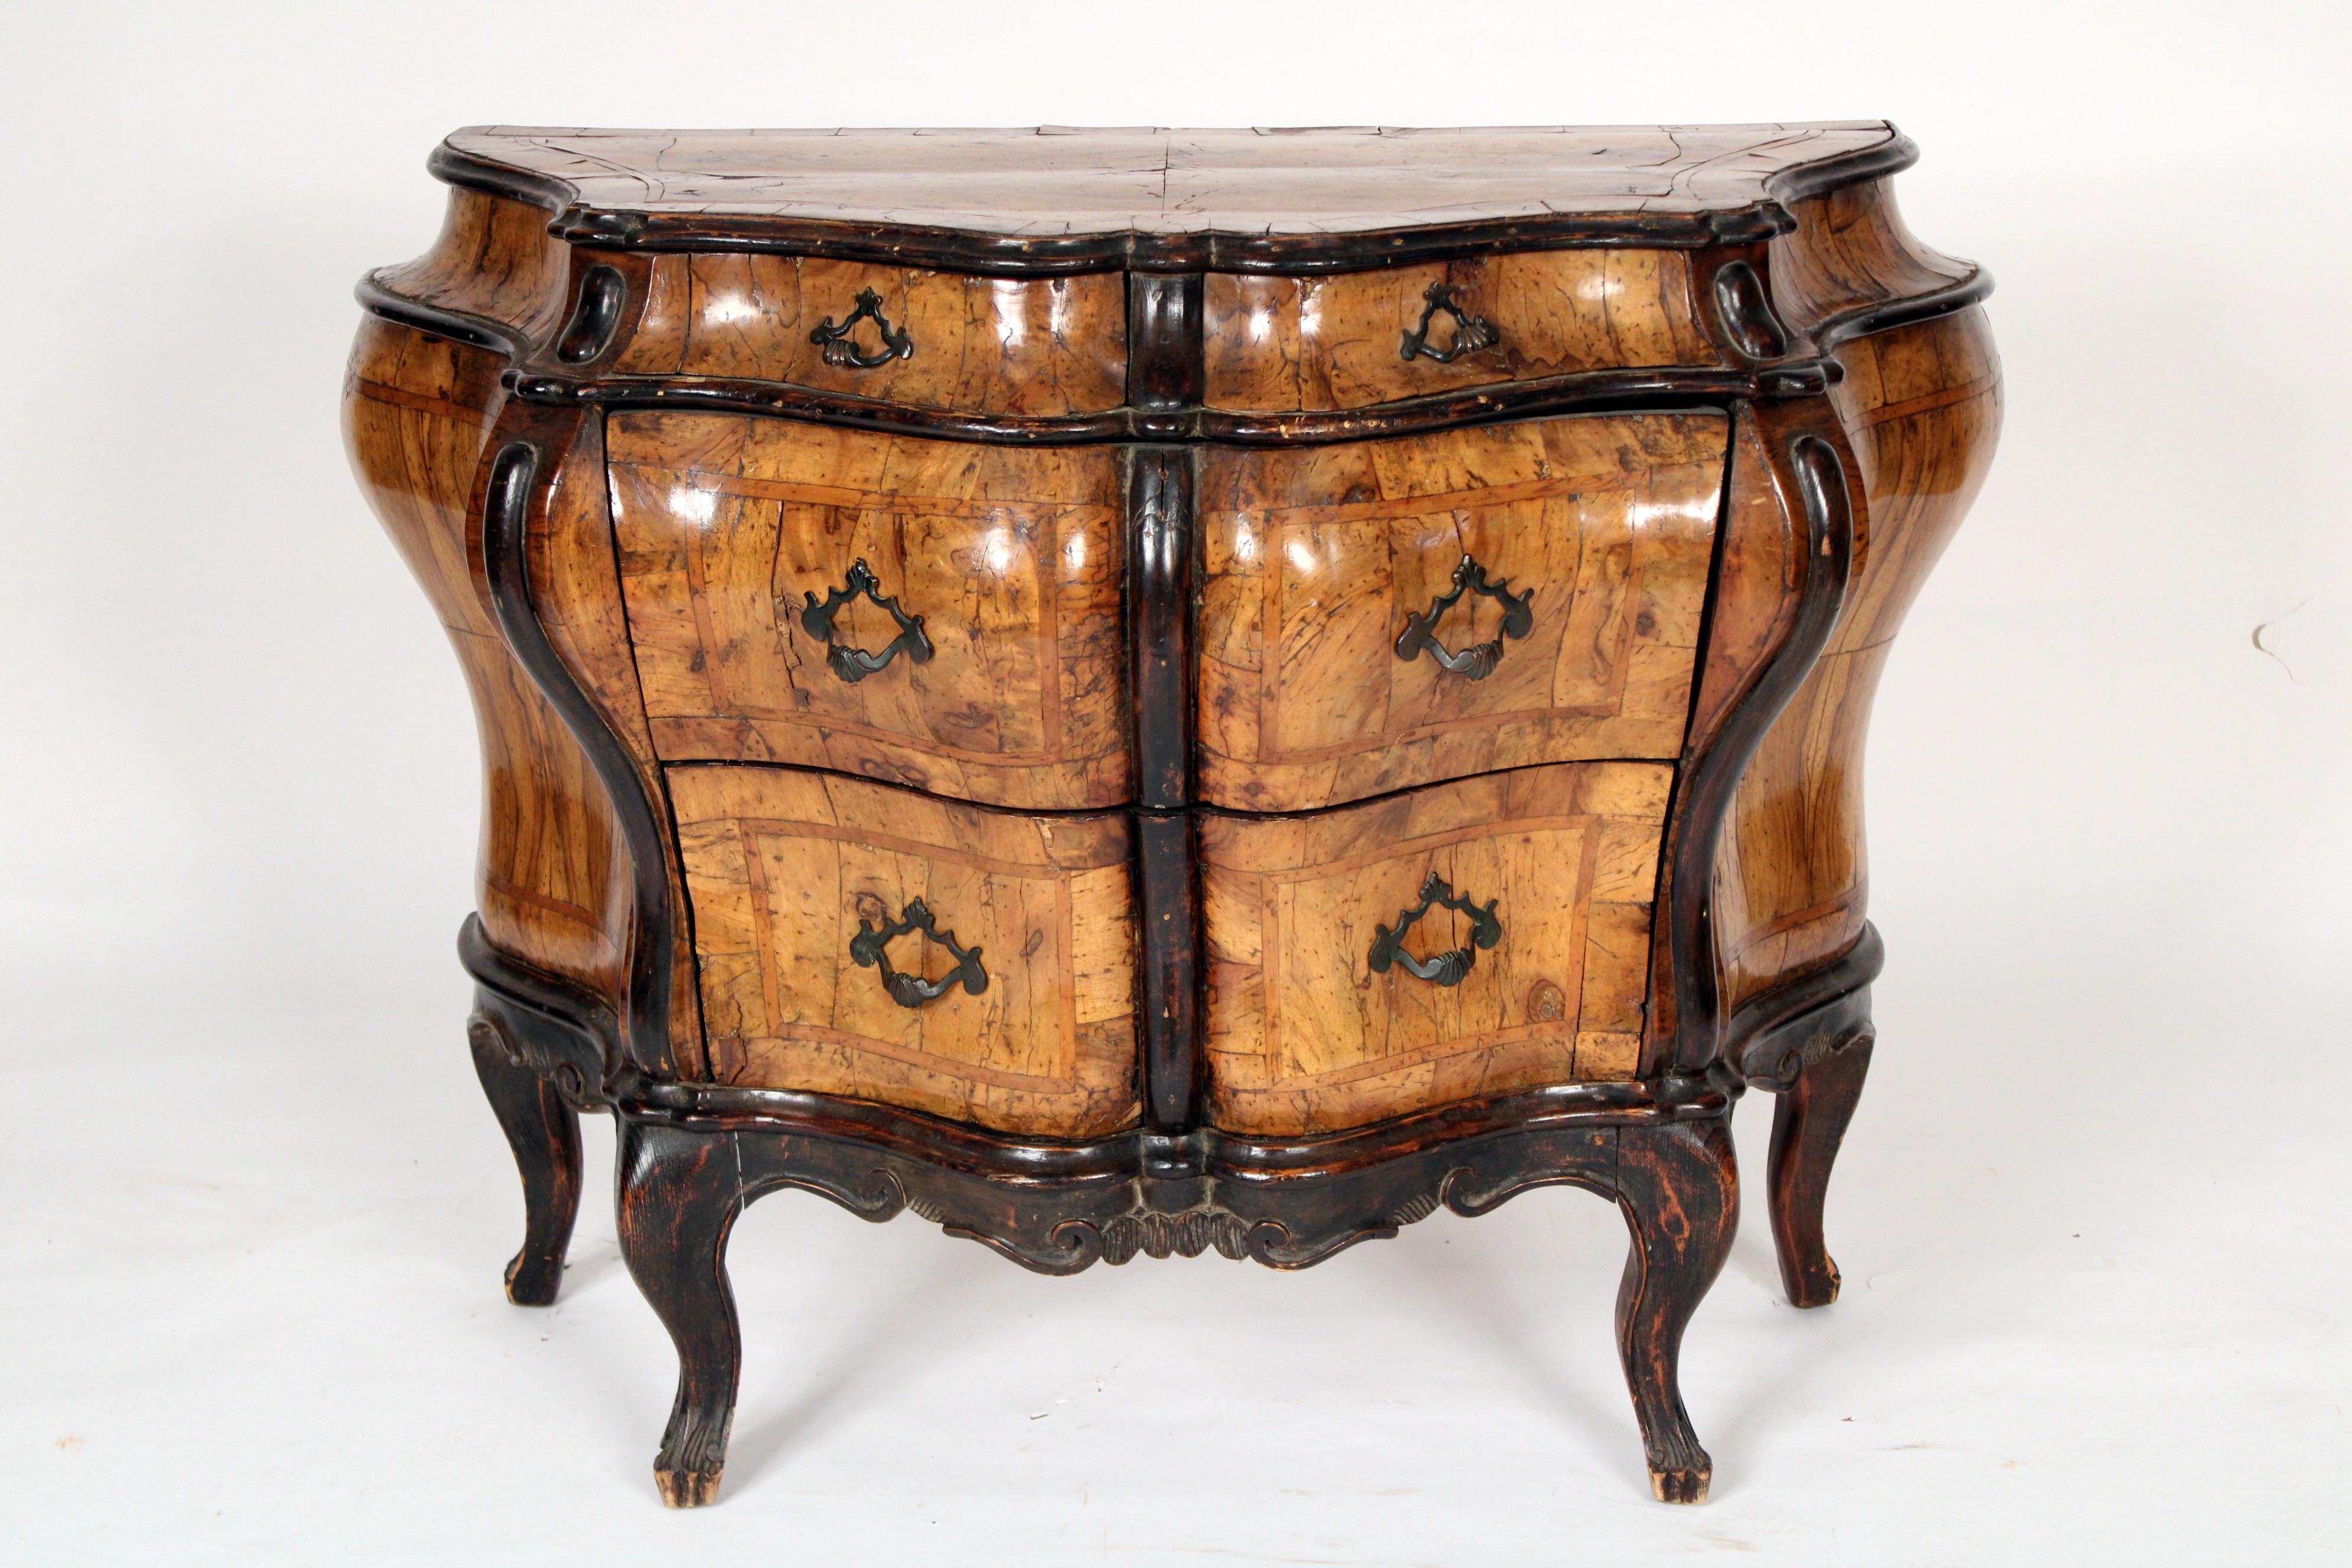 Italian antique Louis XV style olive wood bombe chest of drawers with brass drawer pulls, circa 1900.